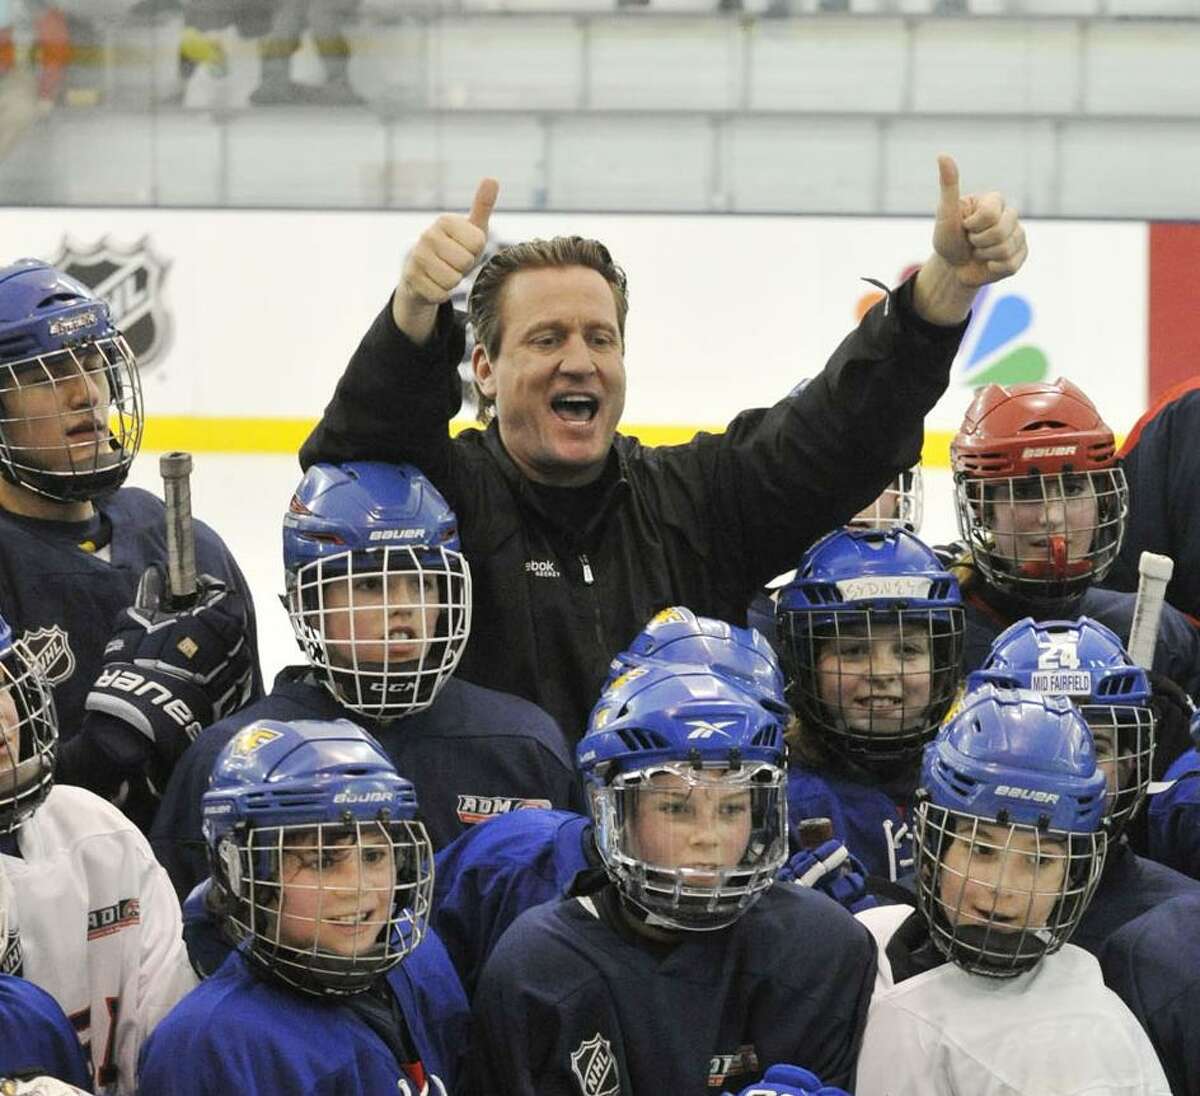 Jeremy Roenick, former NHL player and current NBC commentator, poses with kids at the end of Hockey Day in America at Chelsea Piers in Stamford, Conn., on Sunday, March 2, 2014.